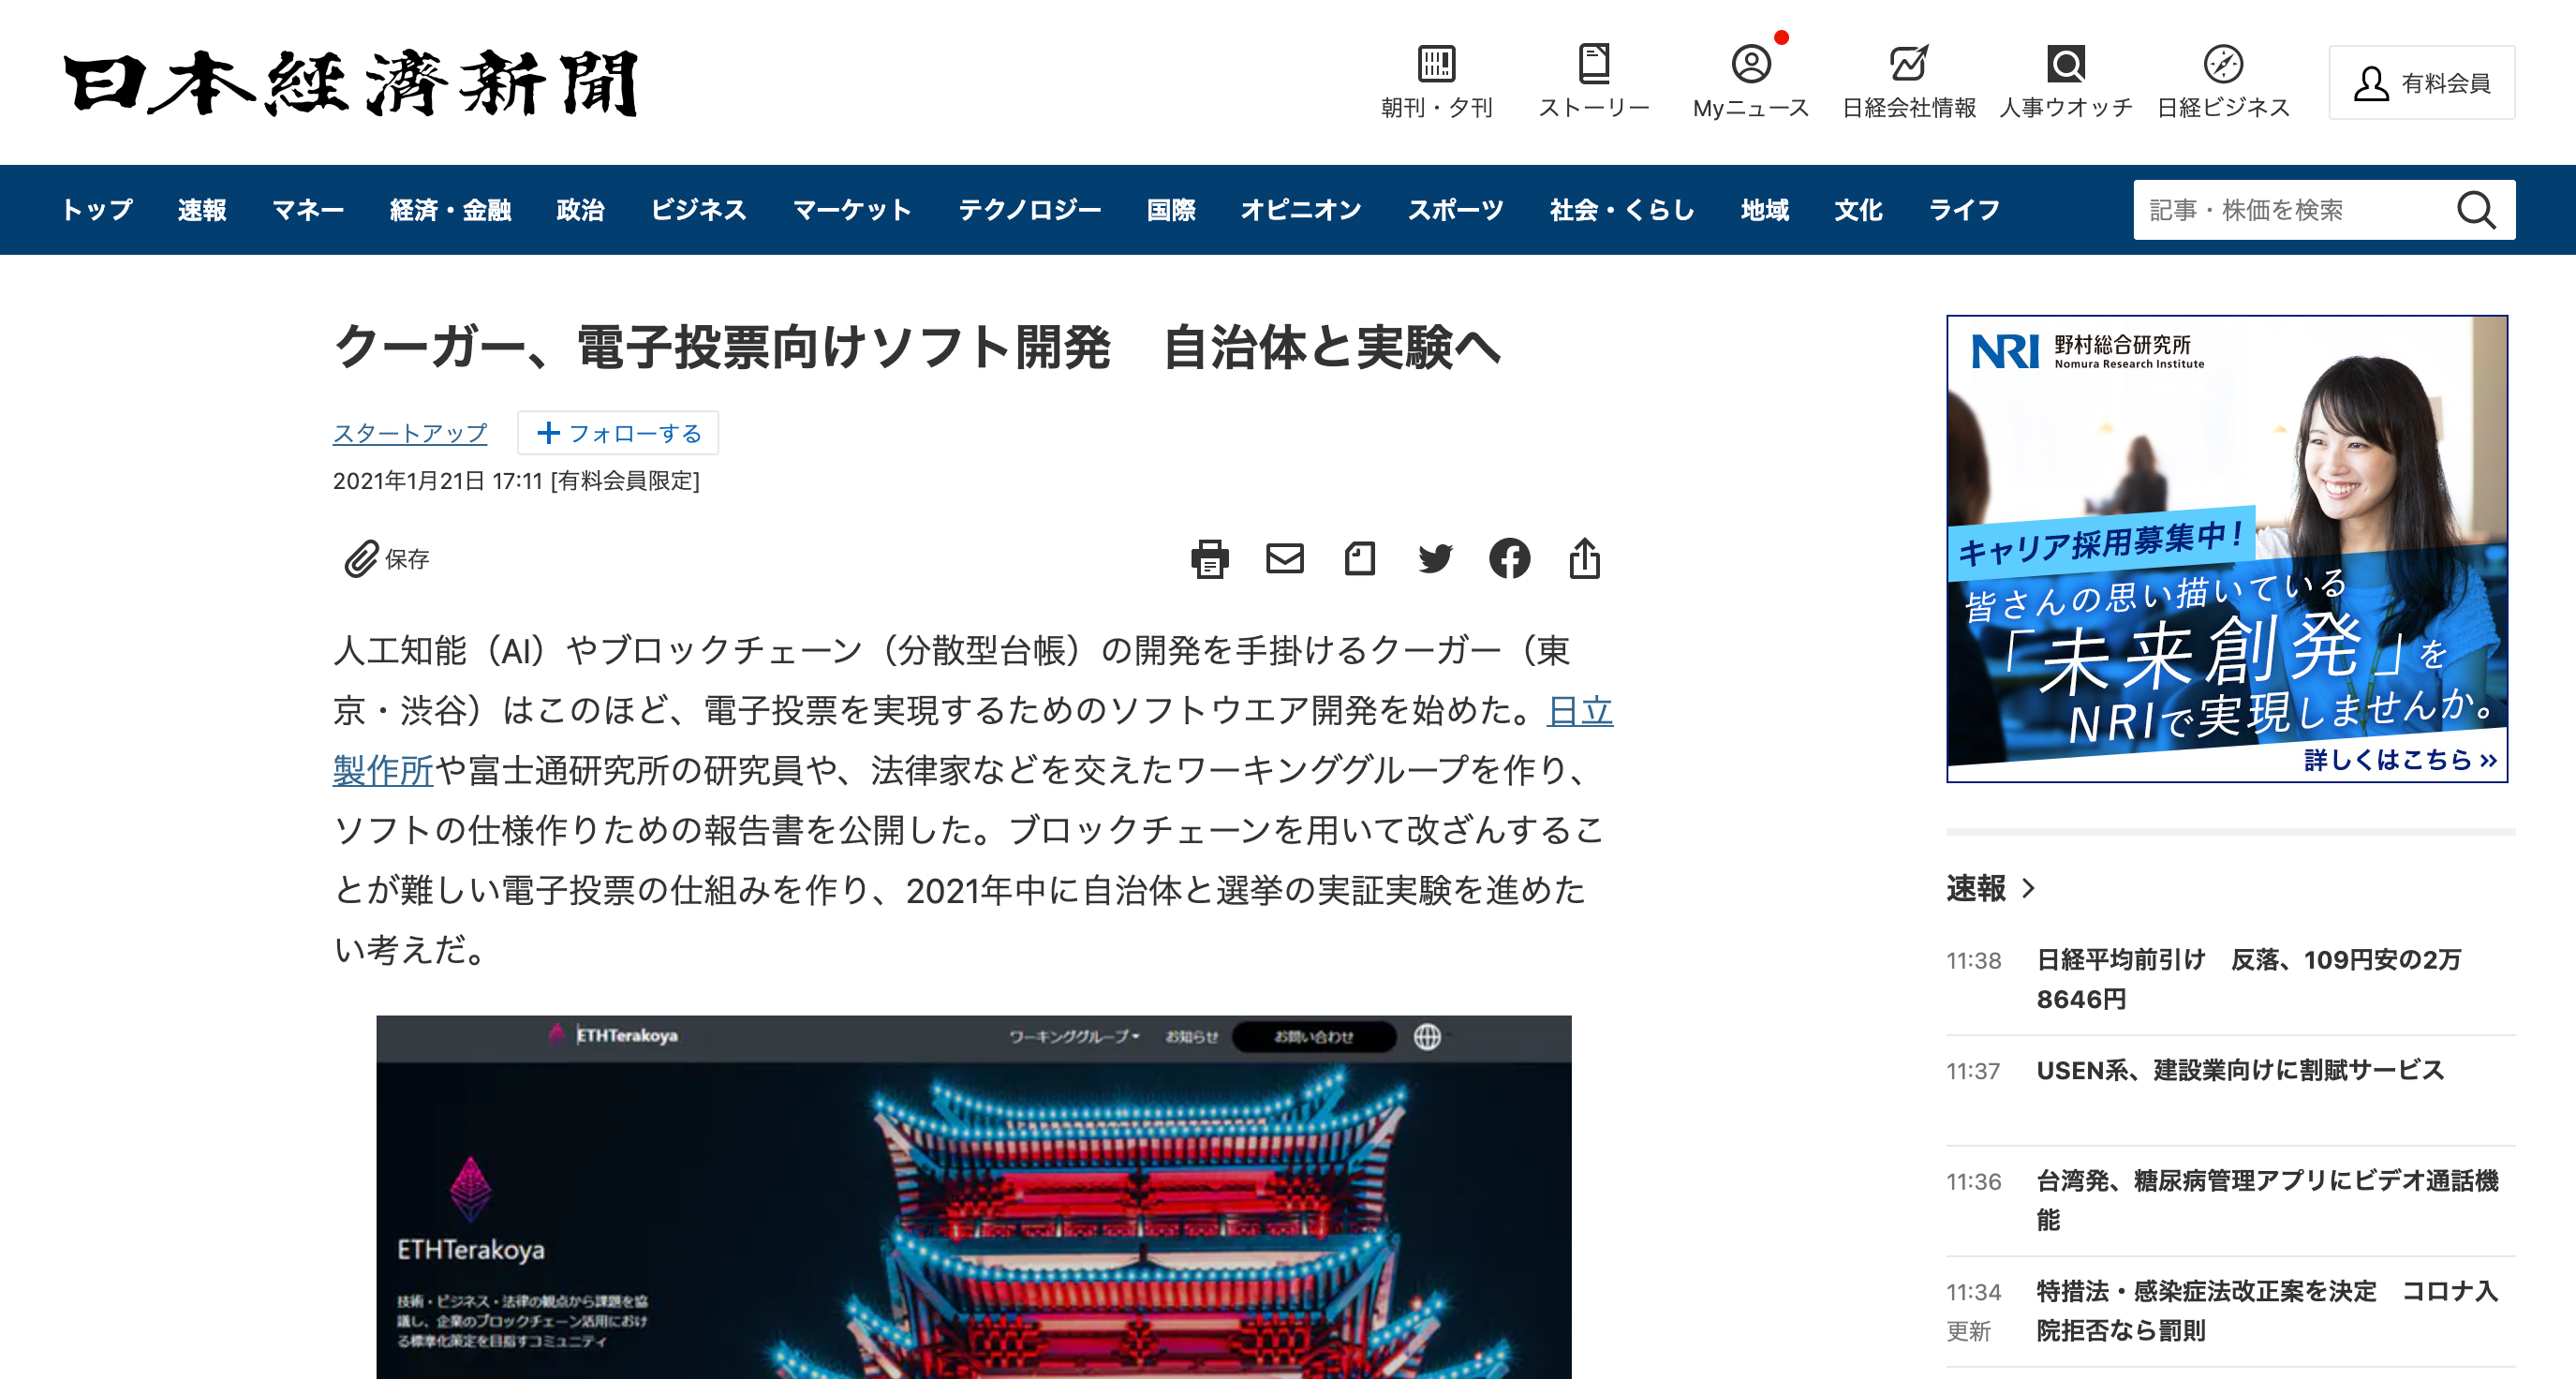 Nihon Keizai Shimbun published an article about the blockchain-based electronic voting system that Couger is working on in ETHTerakoya